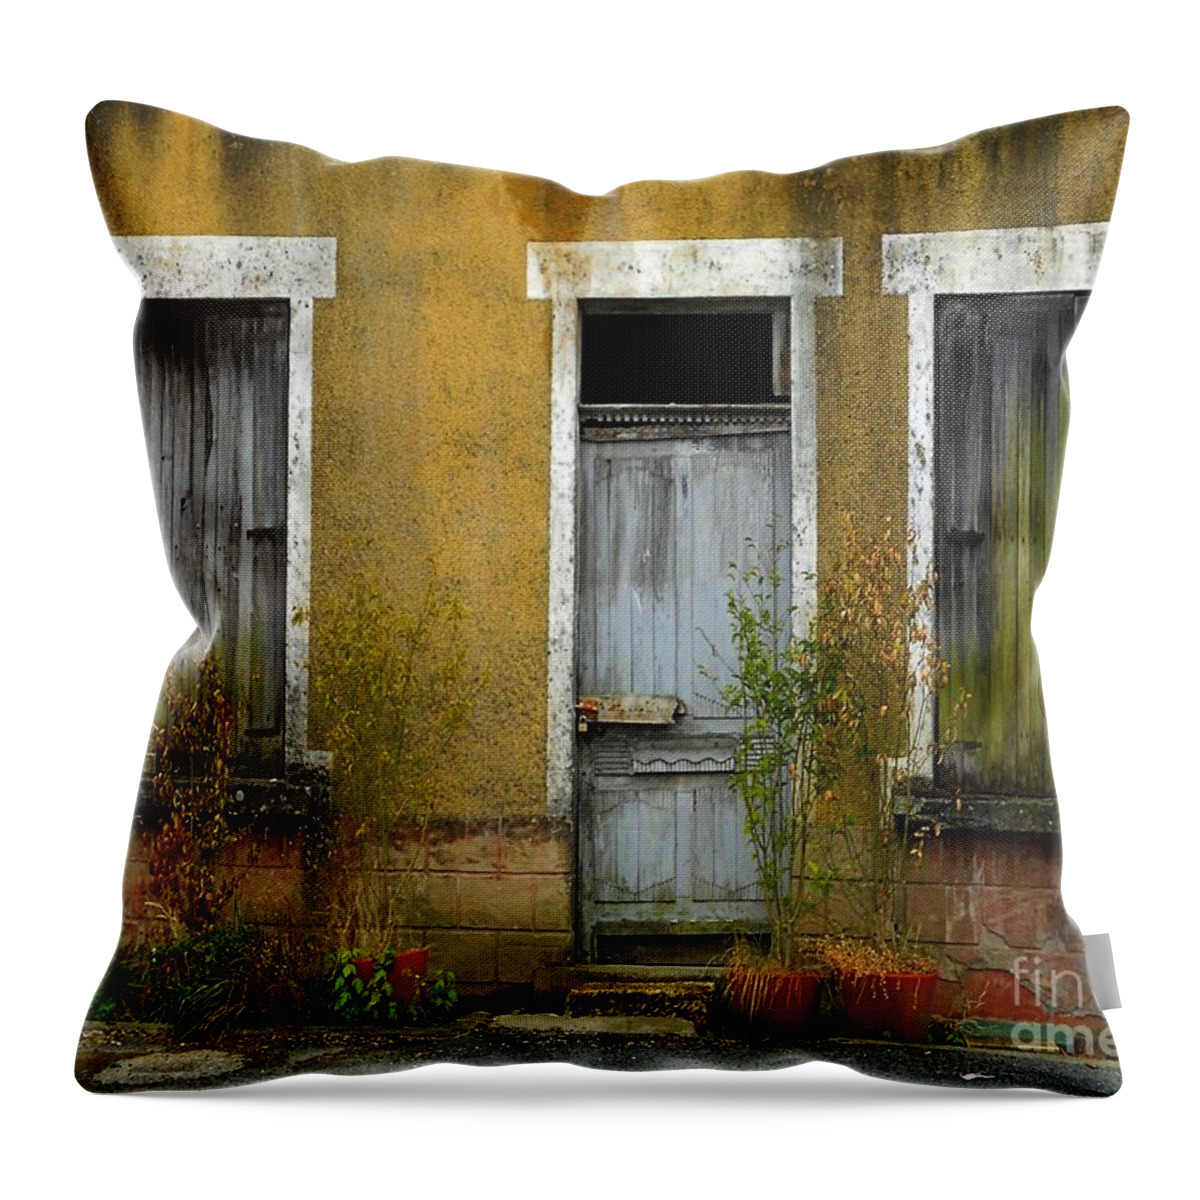 Abstract Throw Pillow featuring the photograph Come Rain or Shine by Lauren Leigh Hunter Fine Art Photography